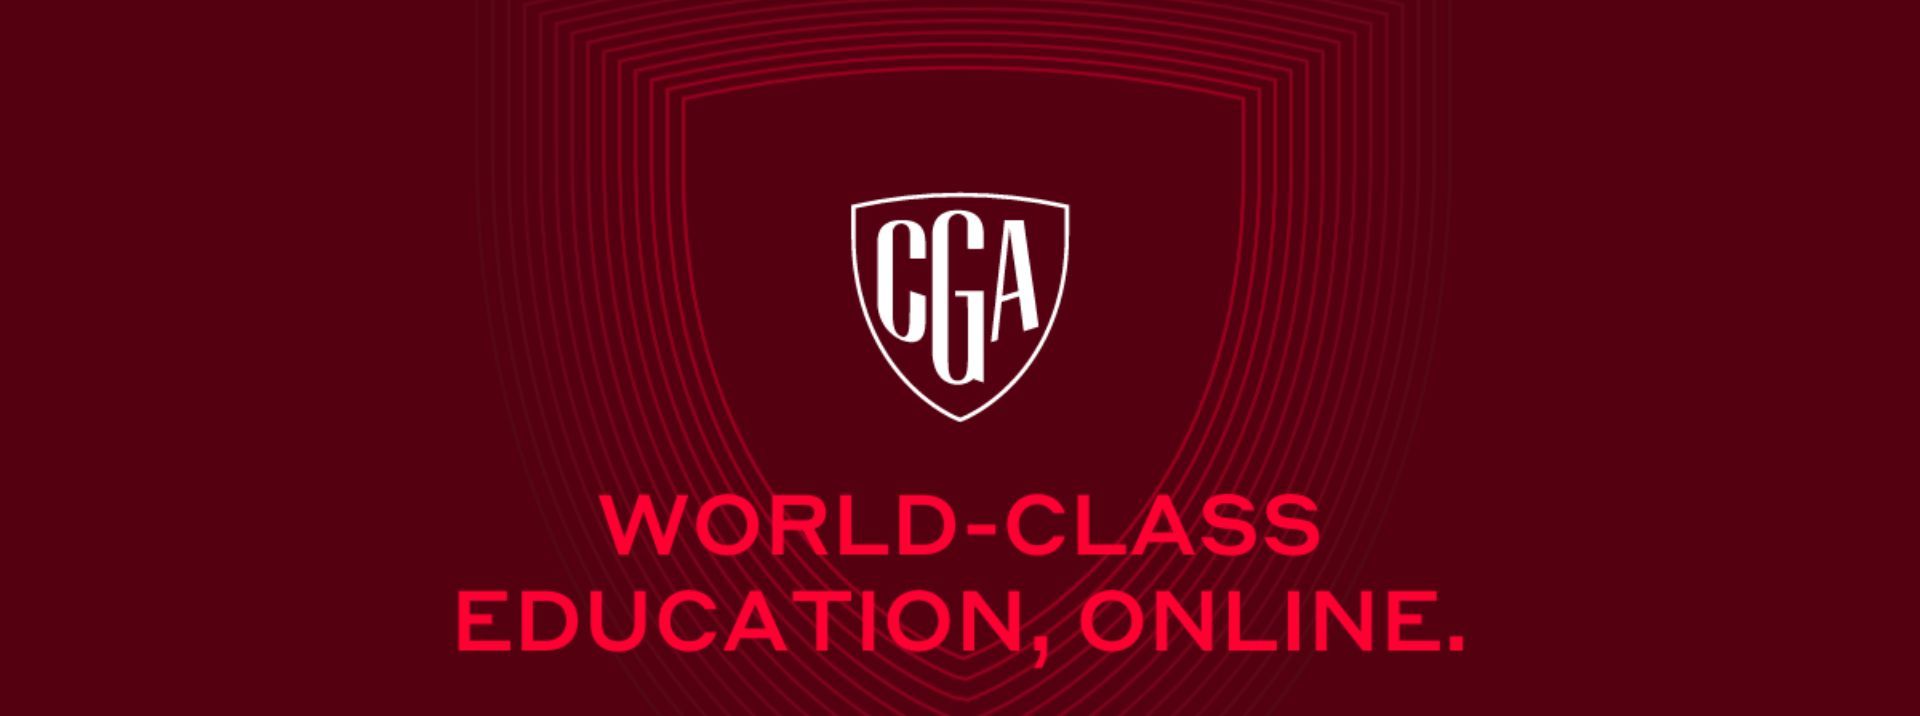 All about the International GCSEs - Crimson Global Academy IN